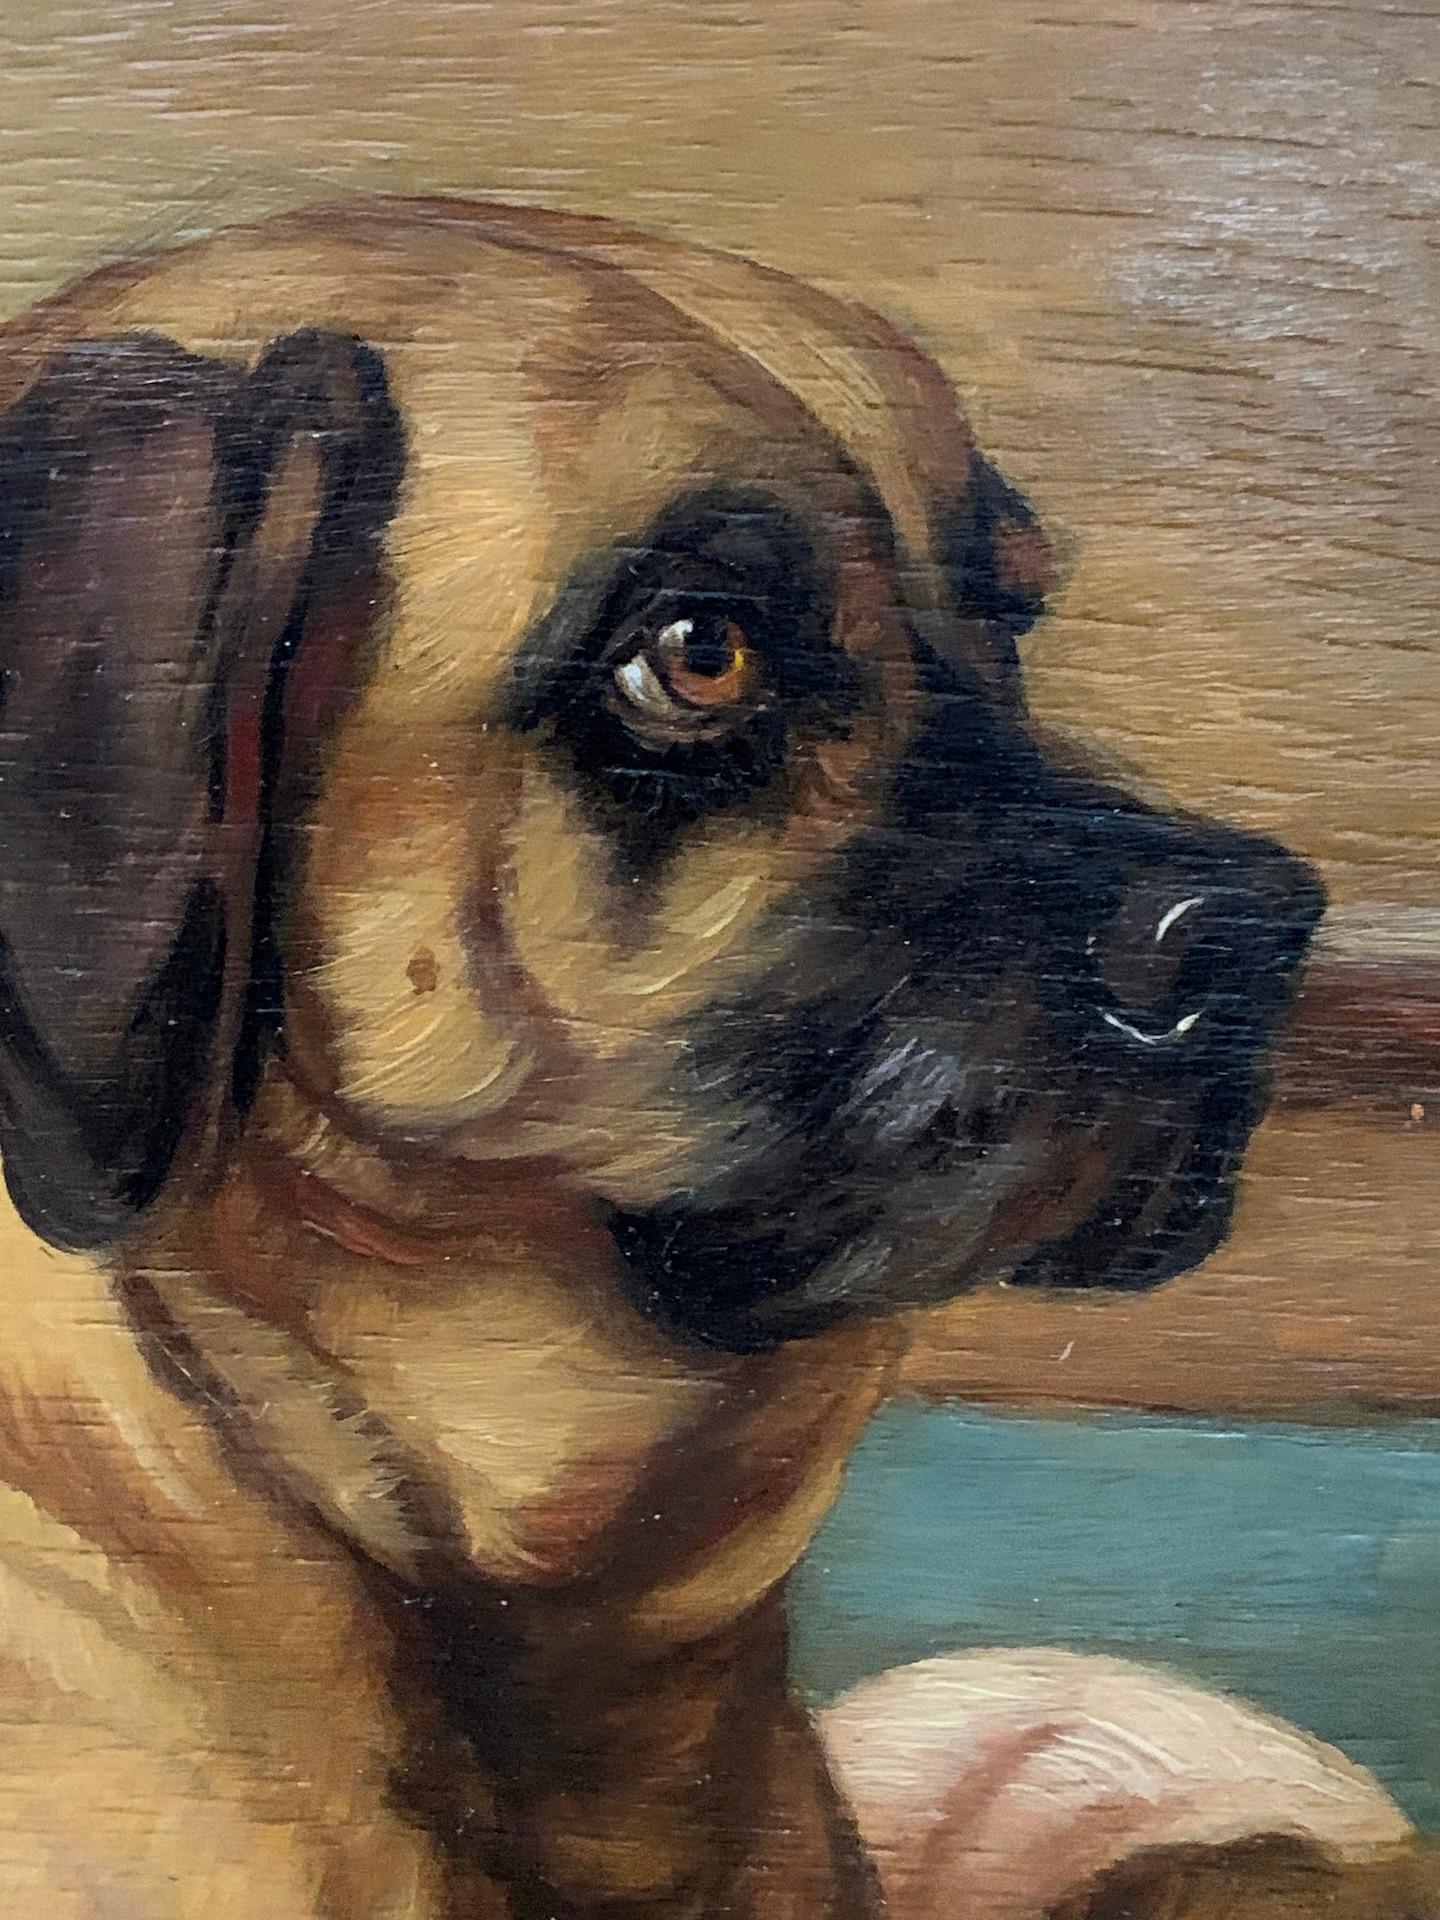 Late 19th-century English portrait of a dog with her puppies in an interior

A wonderfully painted late 19th-century English dog and puppy portrait. Beautifully painted and in excellent original condition. The piece is a classic Victorian animal